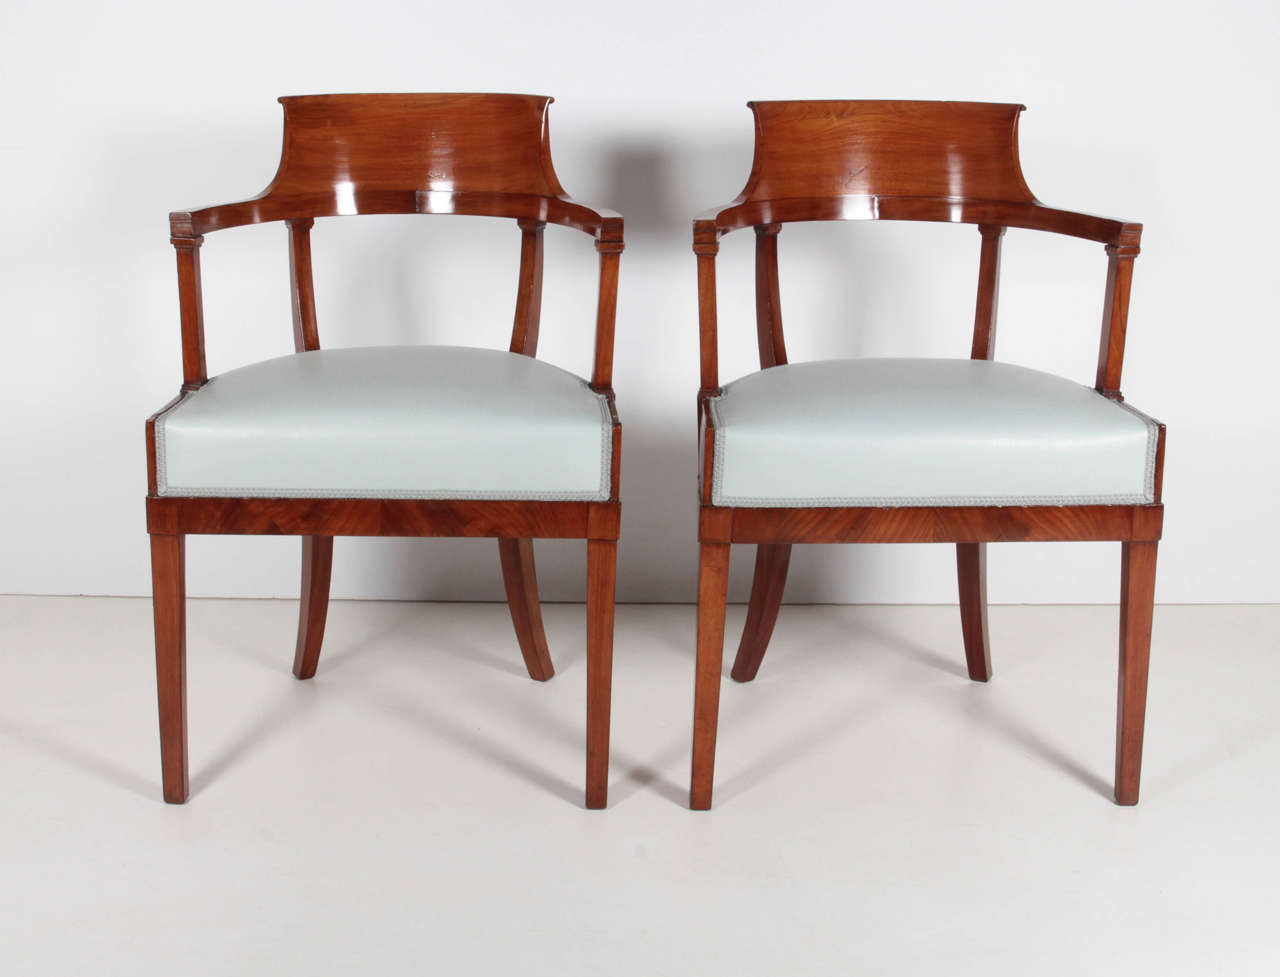 A pair of Swedish mahogany chairs, Late 19th Century, by Alfred Grenander - Architect. Born. Skovde, Sweden Ca. 1863 - Died -  Berlin, Germany 1931. with a scrolled and curved backrest, above a wide frieze and upholstered seat, on square tapering